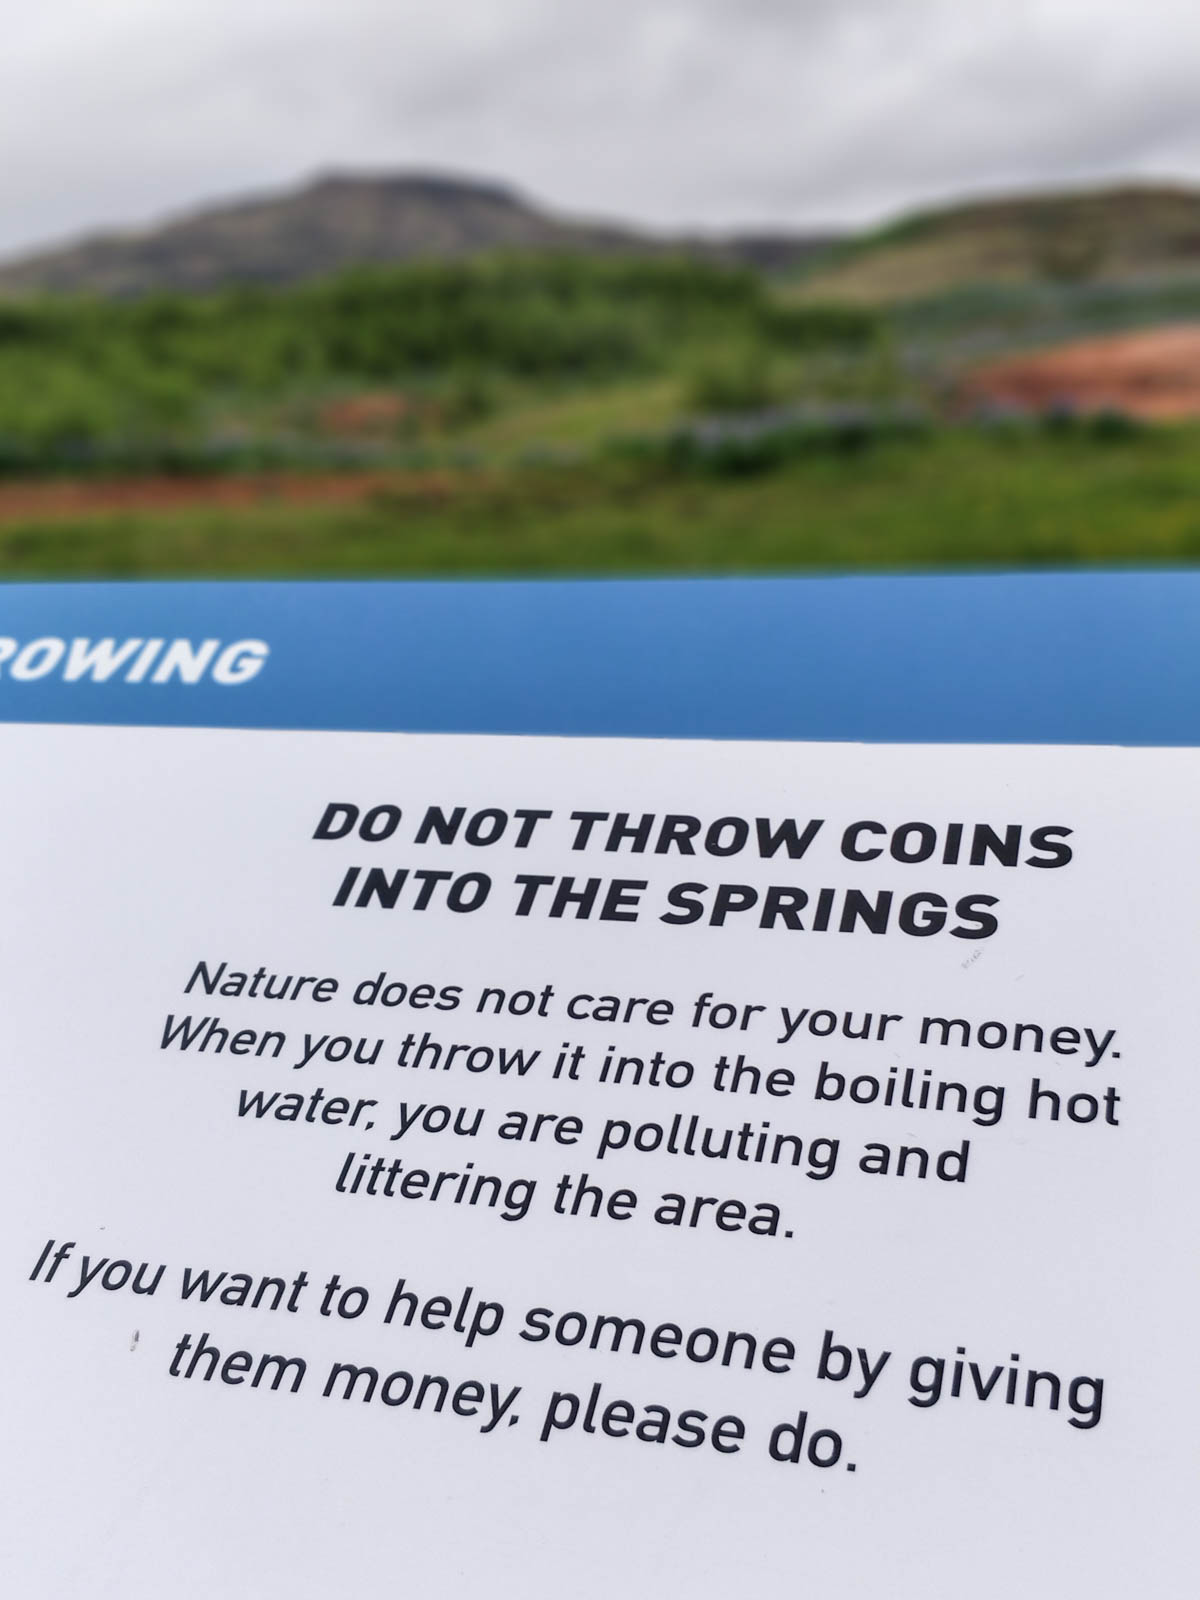 Schild: Do not throw coins into the springs. Nature does not care for your money. When you throw it into the boiling hot water, you are polluting and littering the area. If you want to help someone by giving them money, please do.